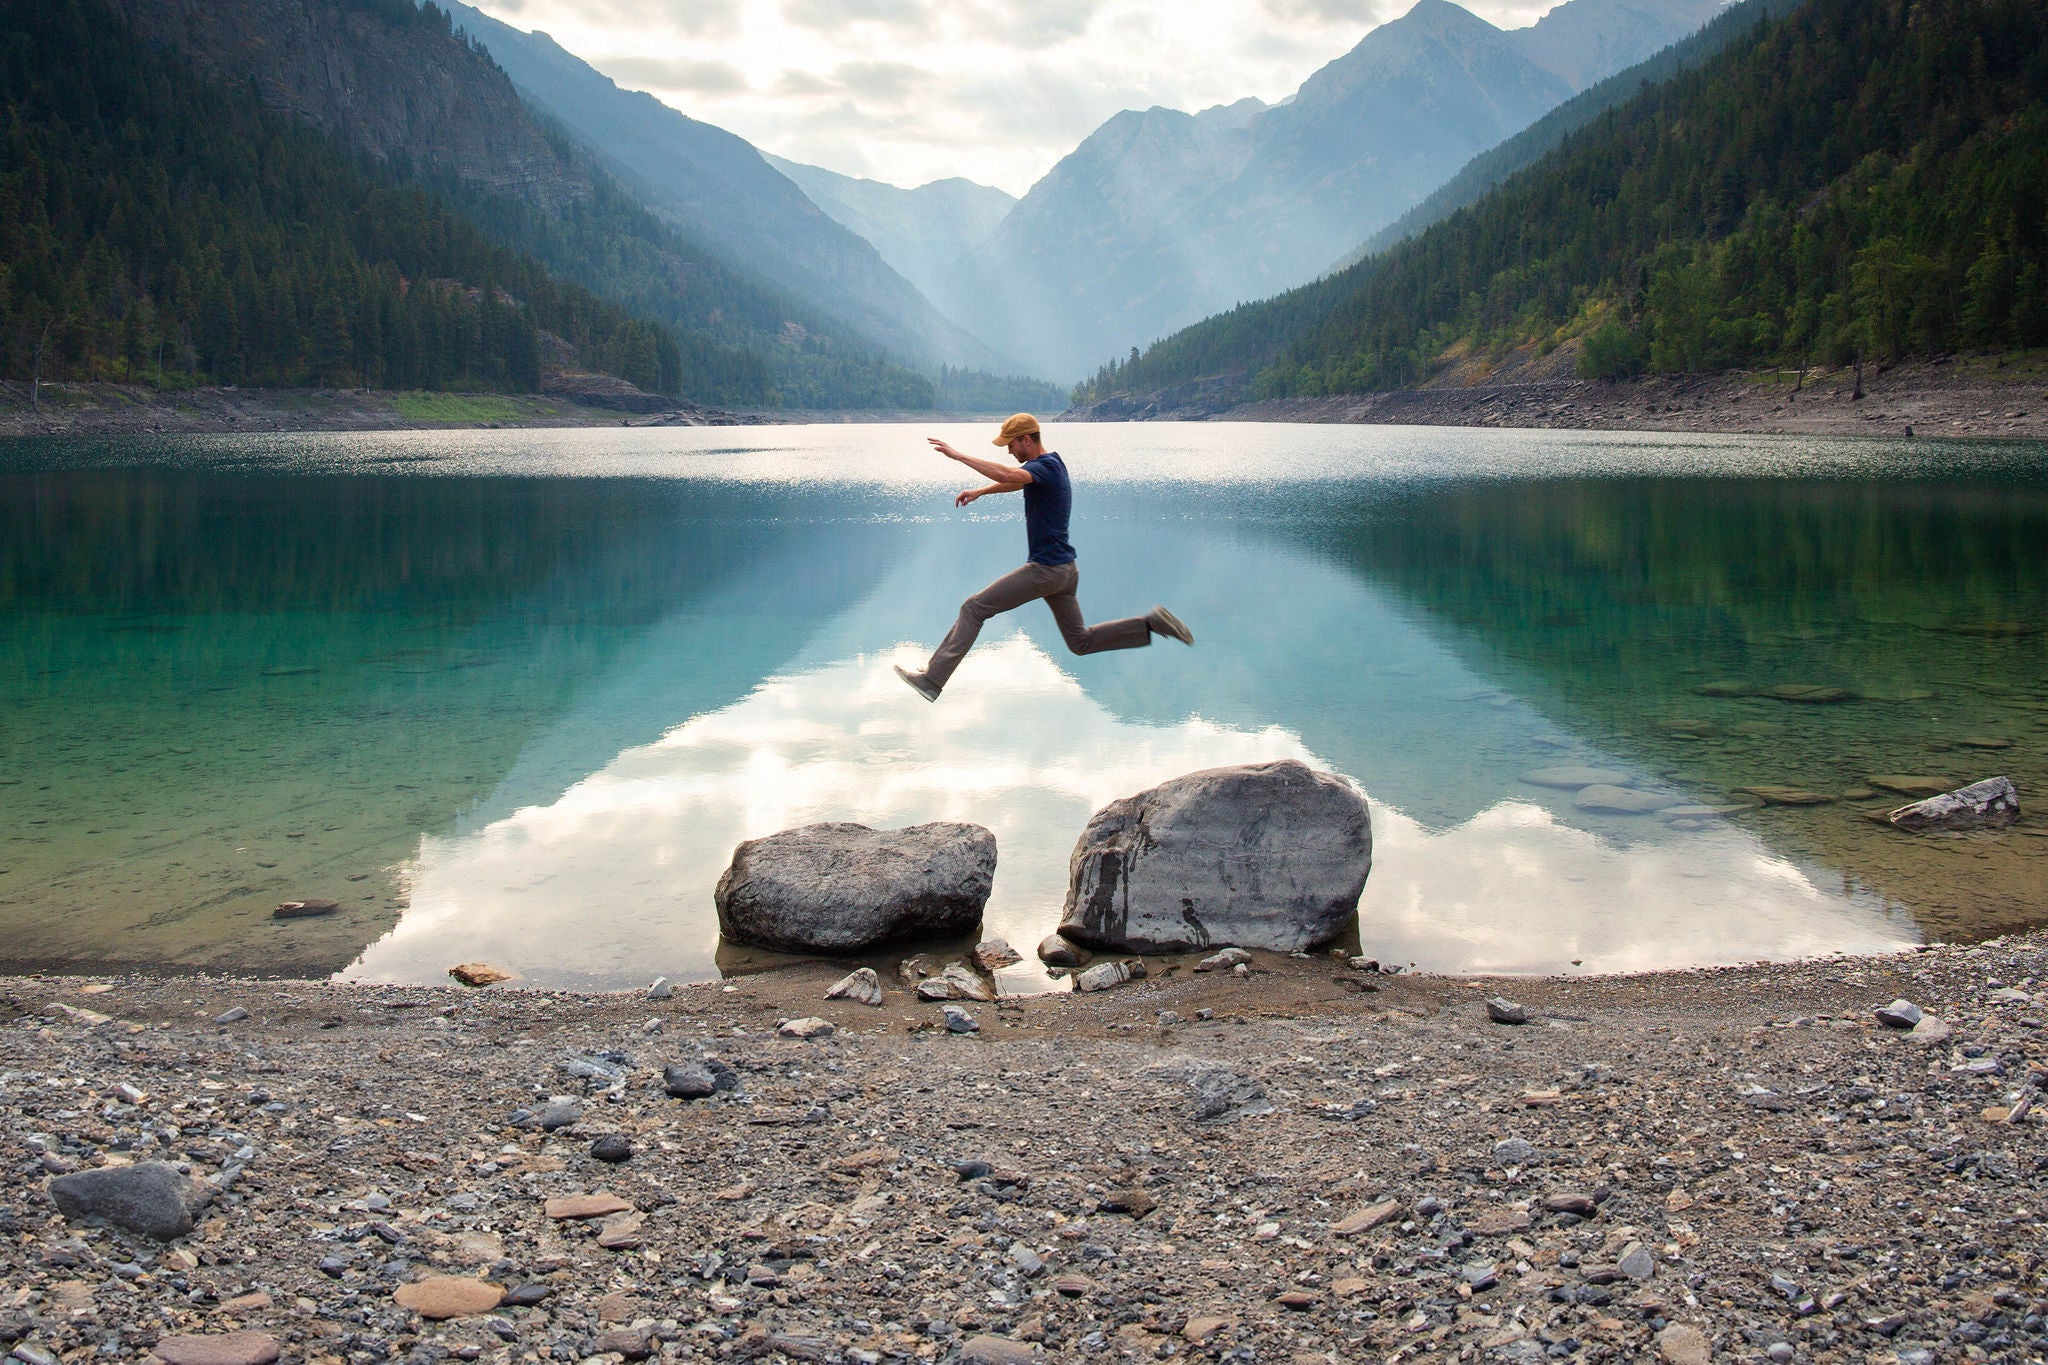 Man jumping between rocks by a lake with mountains